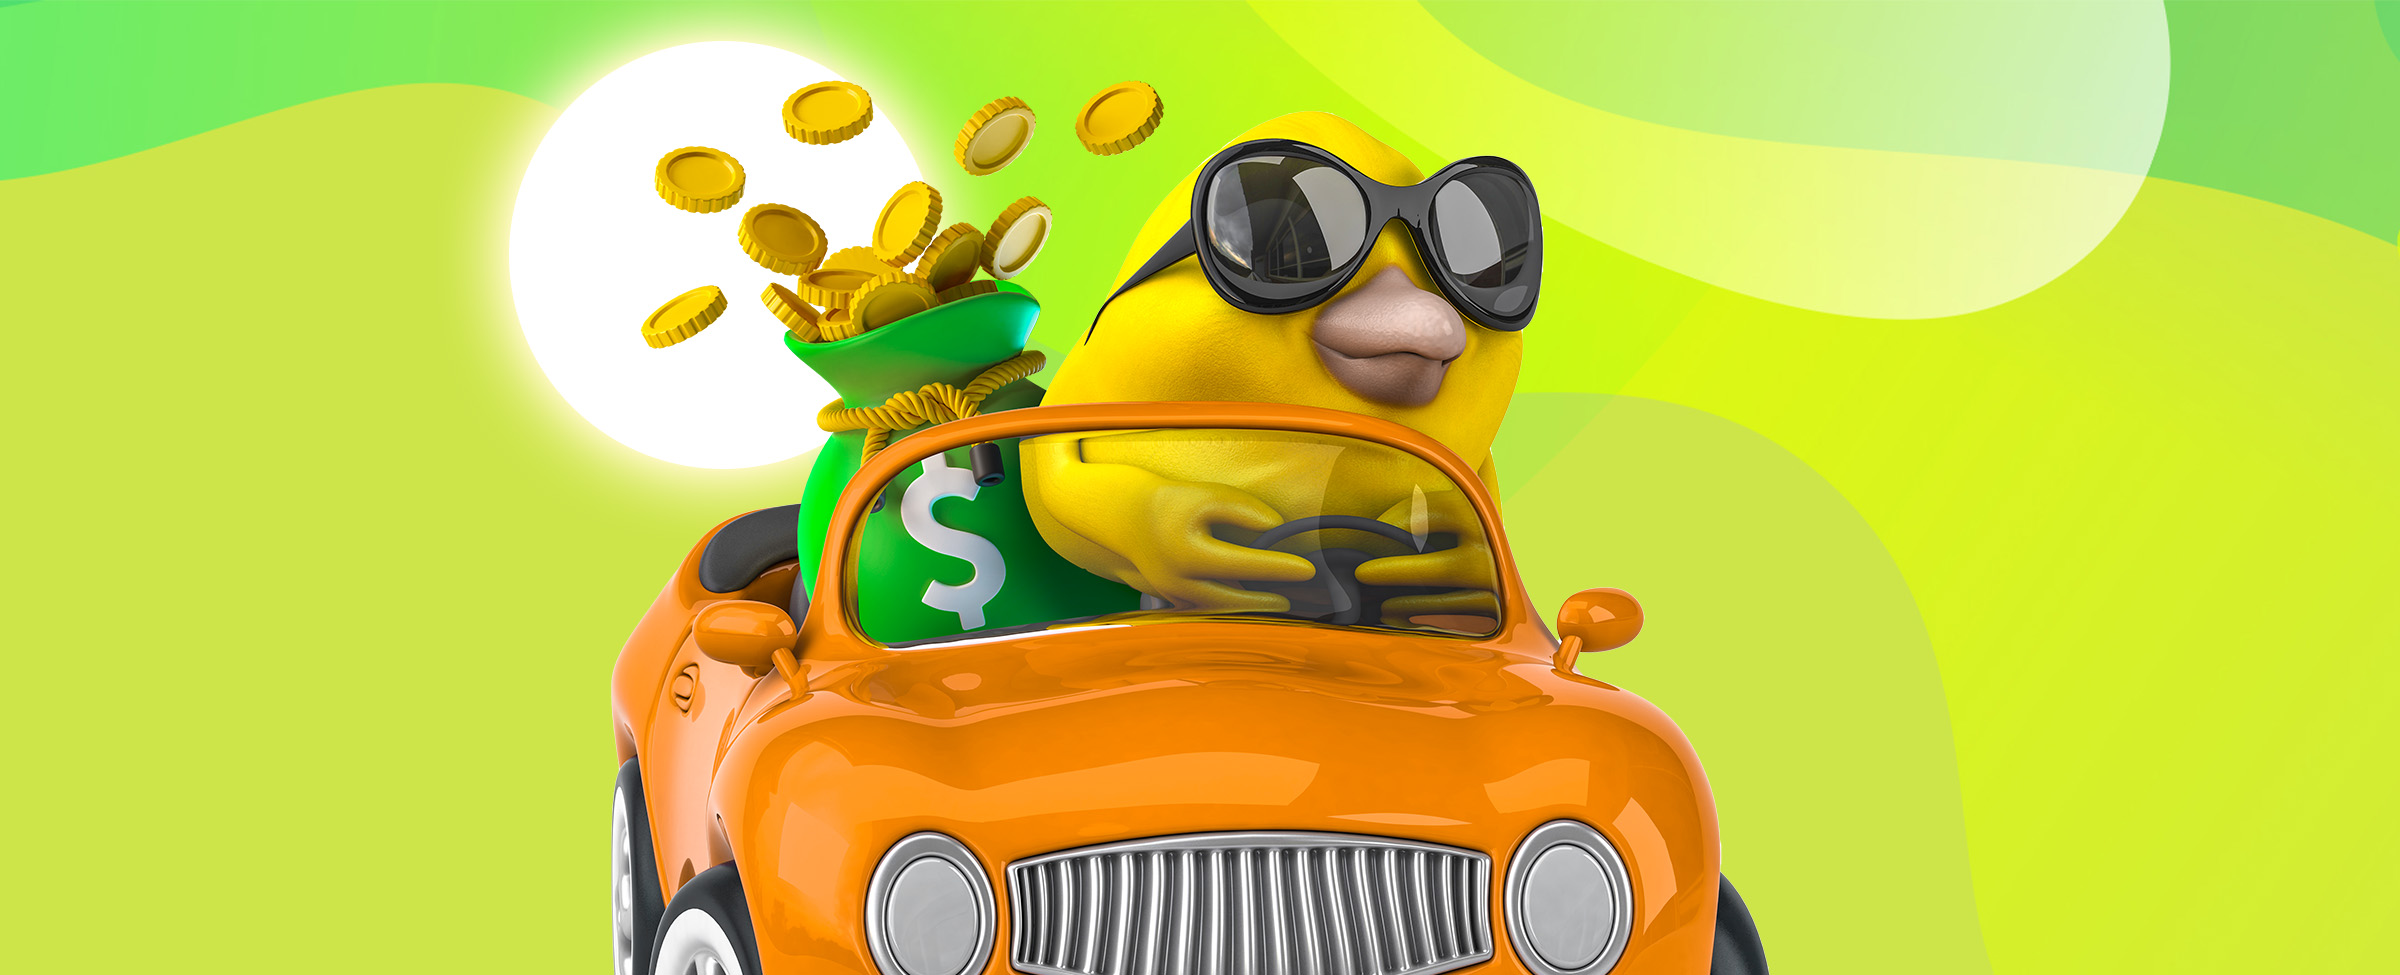 An animated yellow bird behind the wheel of a bright orange mini car. The bird wears oversized sunglasses, and has its hands around the steering wheel, as coins spill out of the vehicle. With the sun in the distance, the image is set against a multi-toned lime green background.